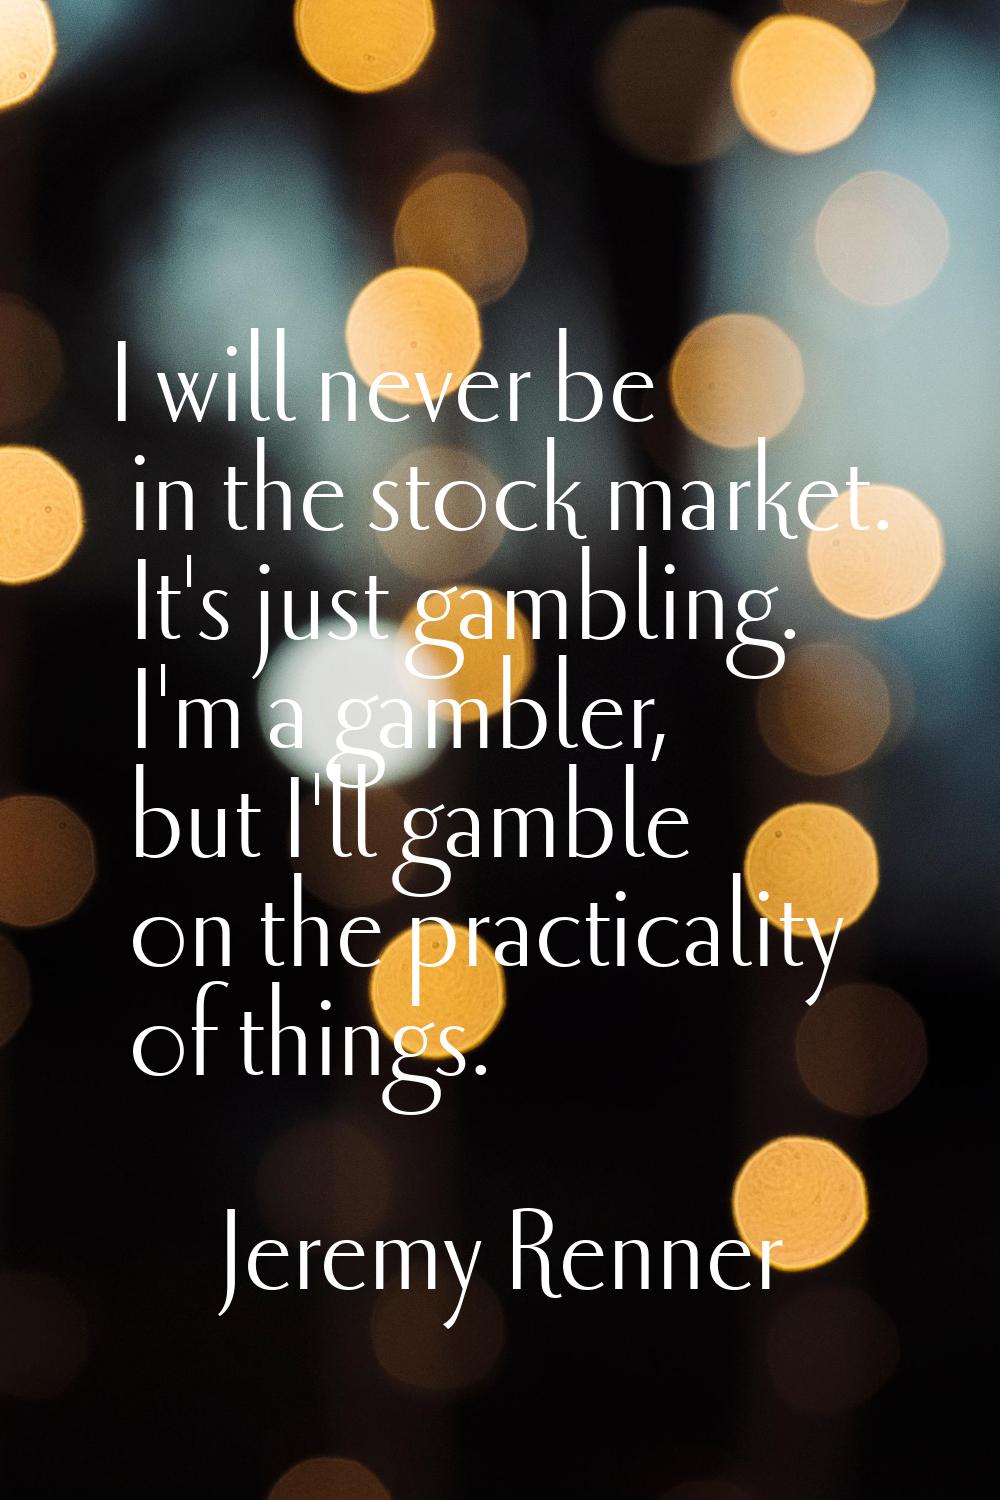 I will never be in the stock market. It's just gambling. I'm a gambler, but I'll gamble on the prac